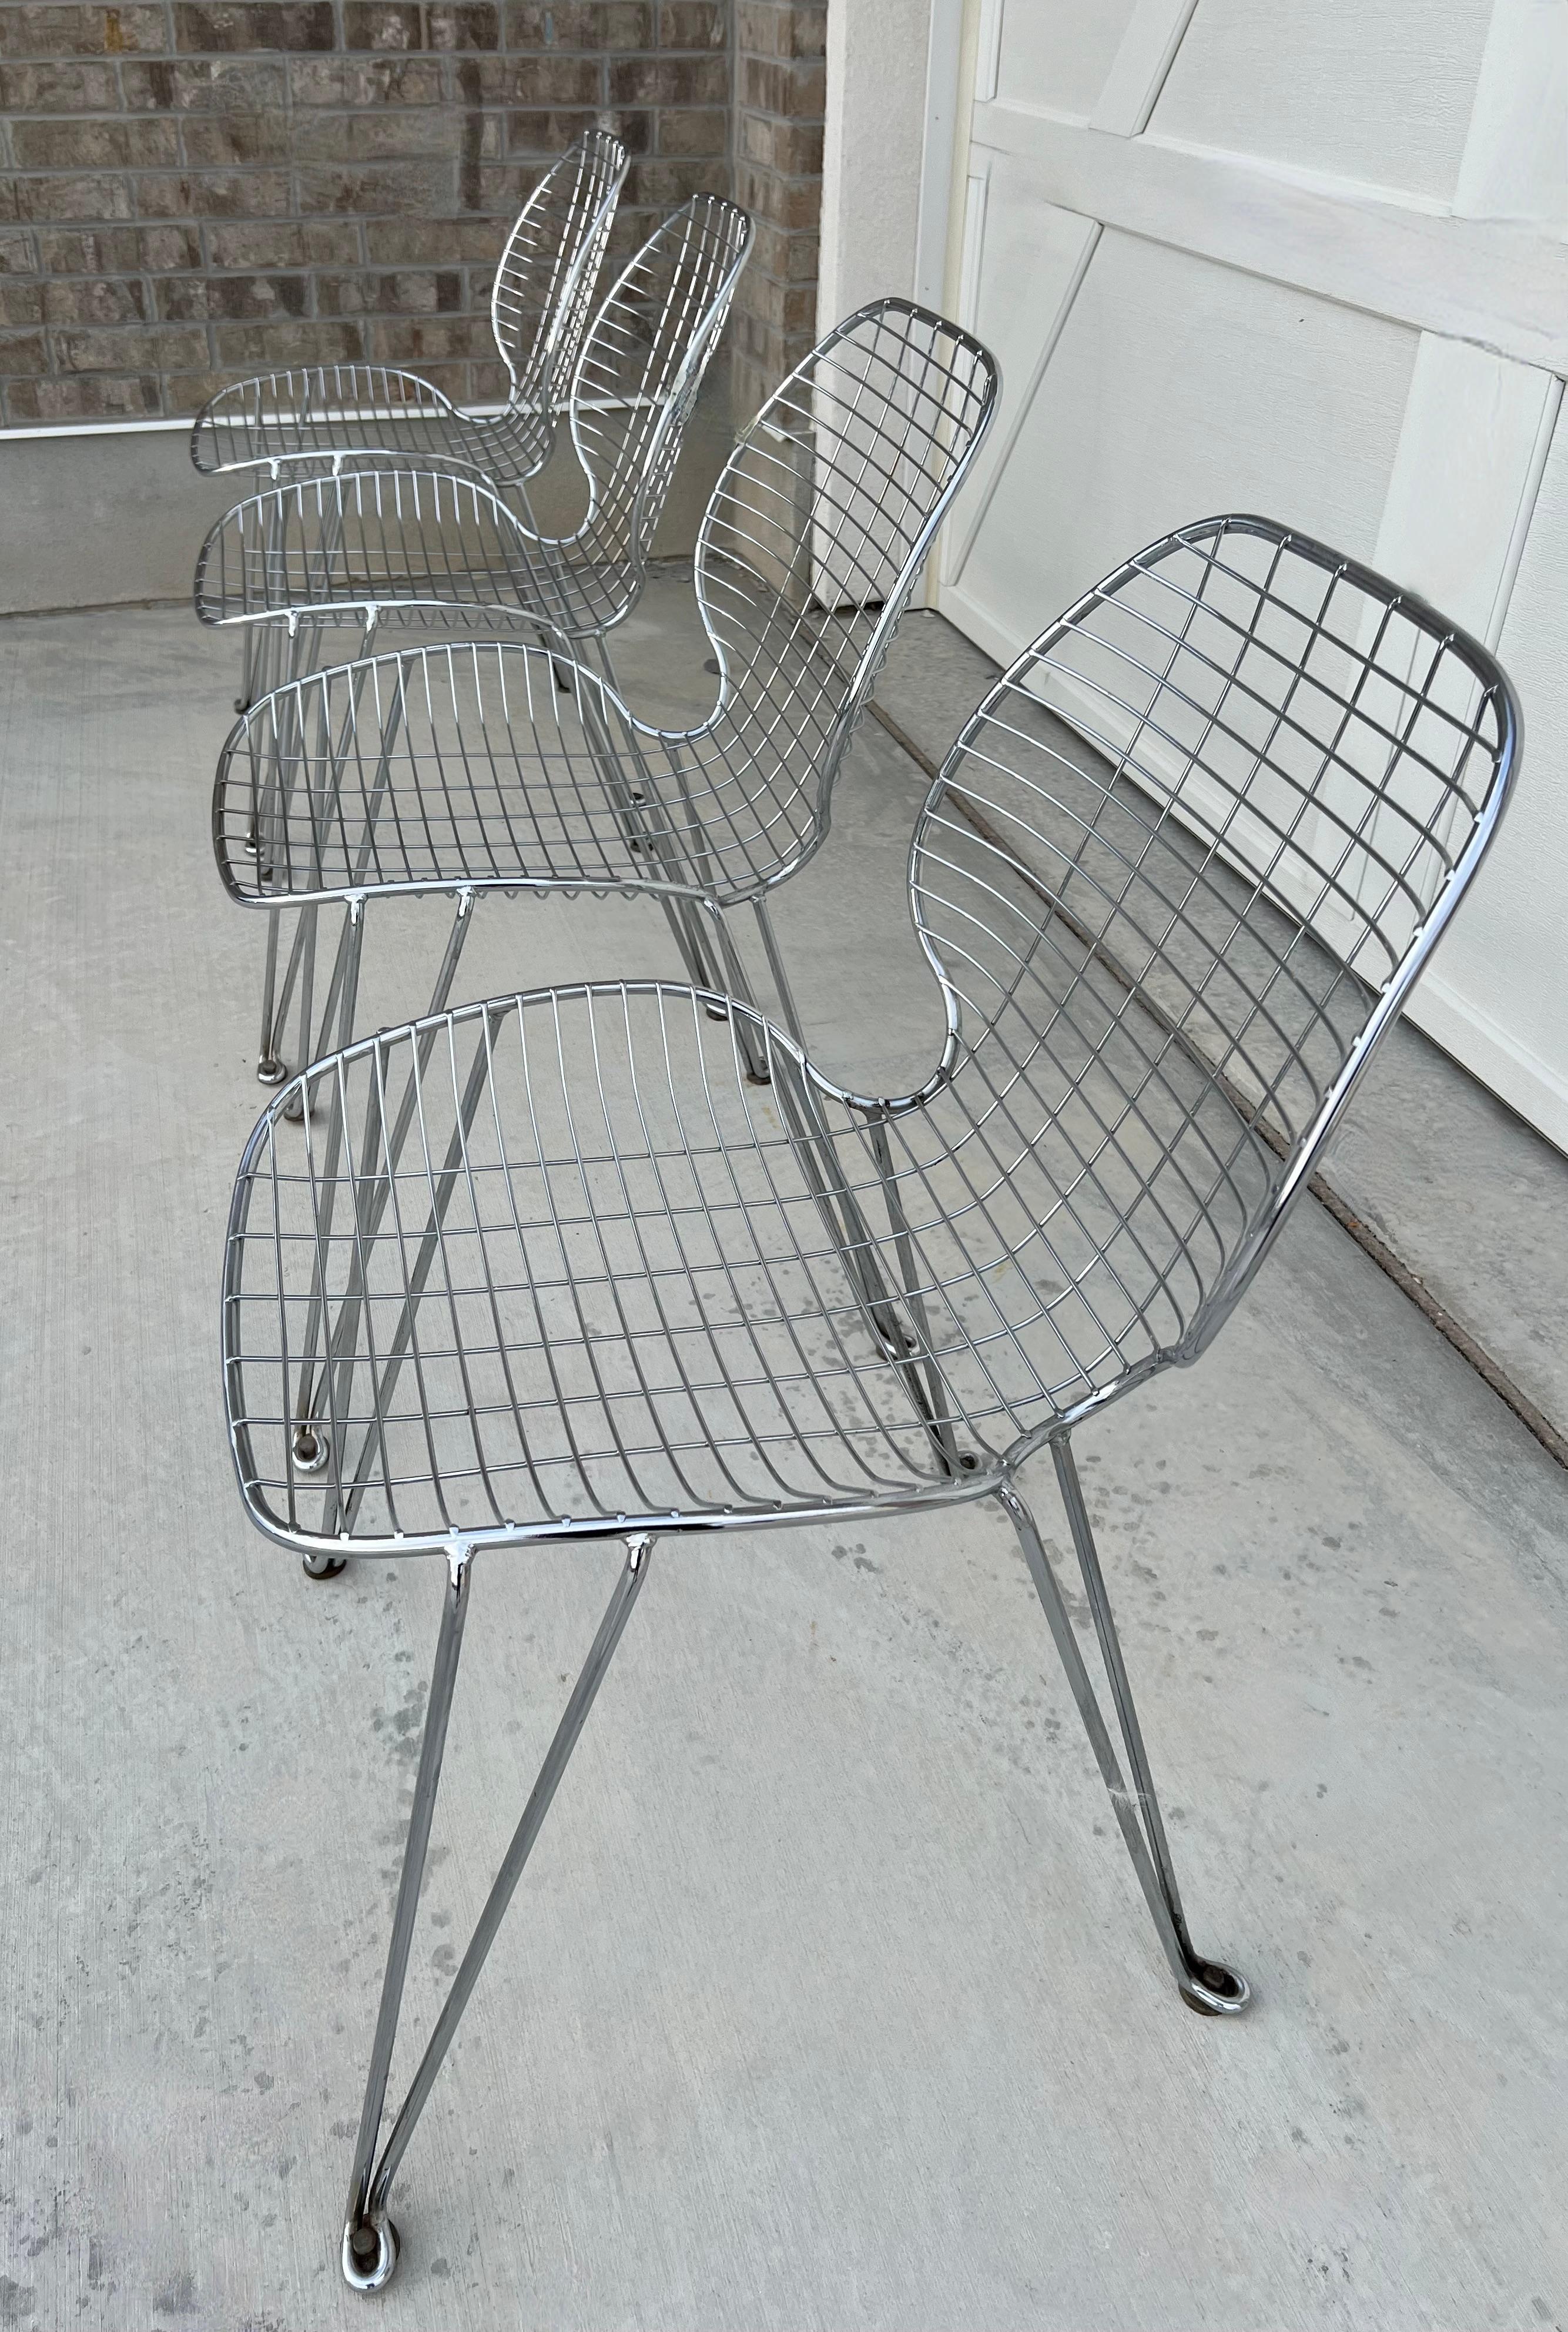 Vintage Metal Wire Chairs With Hairpin Legs - Set of Four For Sale 3